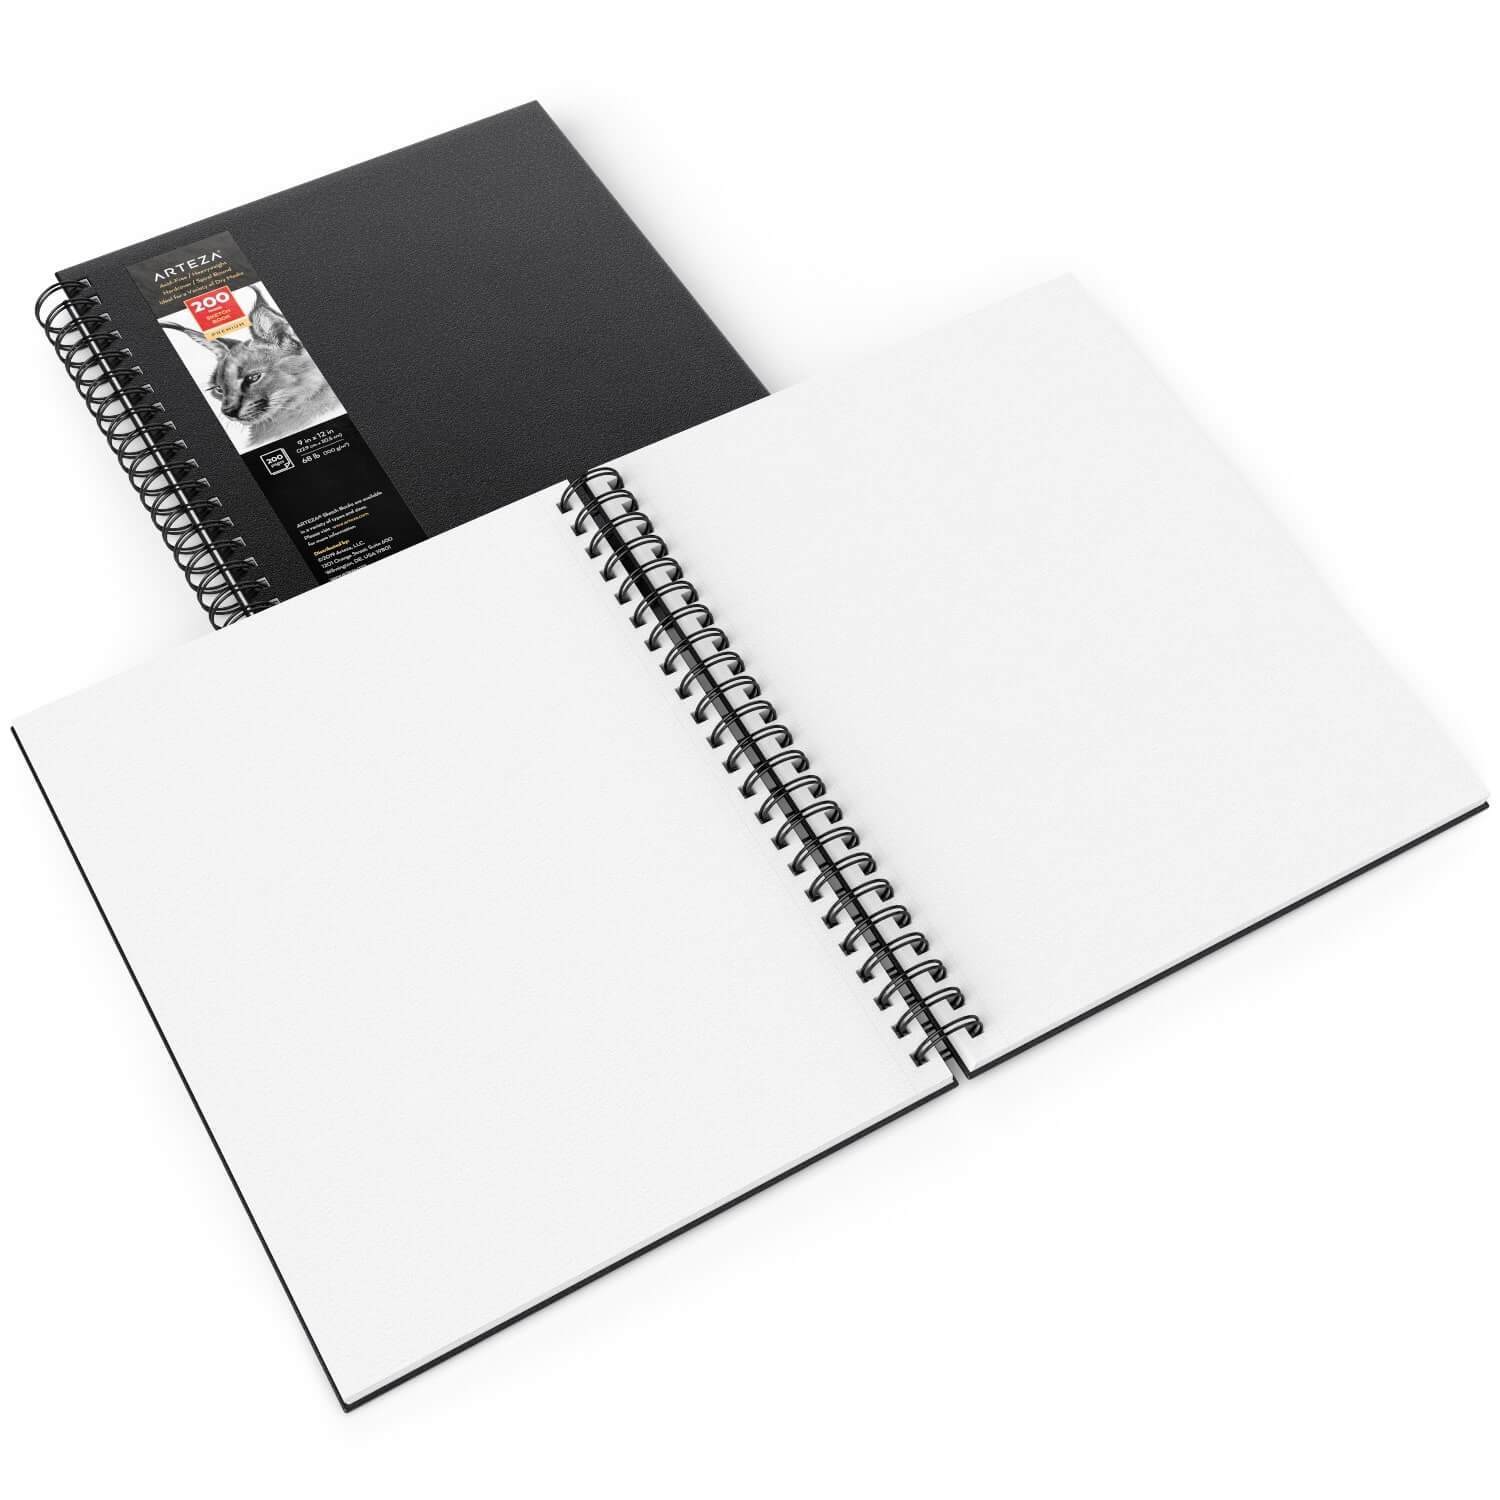  Arteza Sketch Book, 9x12-inch, 2-Pack, Black Drawing Pads, 200  Sheets Total, 68 lb 100 GSM, Hardcover Sketchbook, Spiral-Bound, Use with  Pencils, Charcoal, Pens, Crayons & Other Dry Media : Arts, Crafts